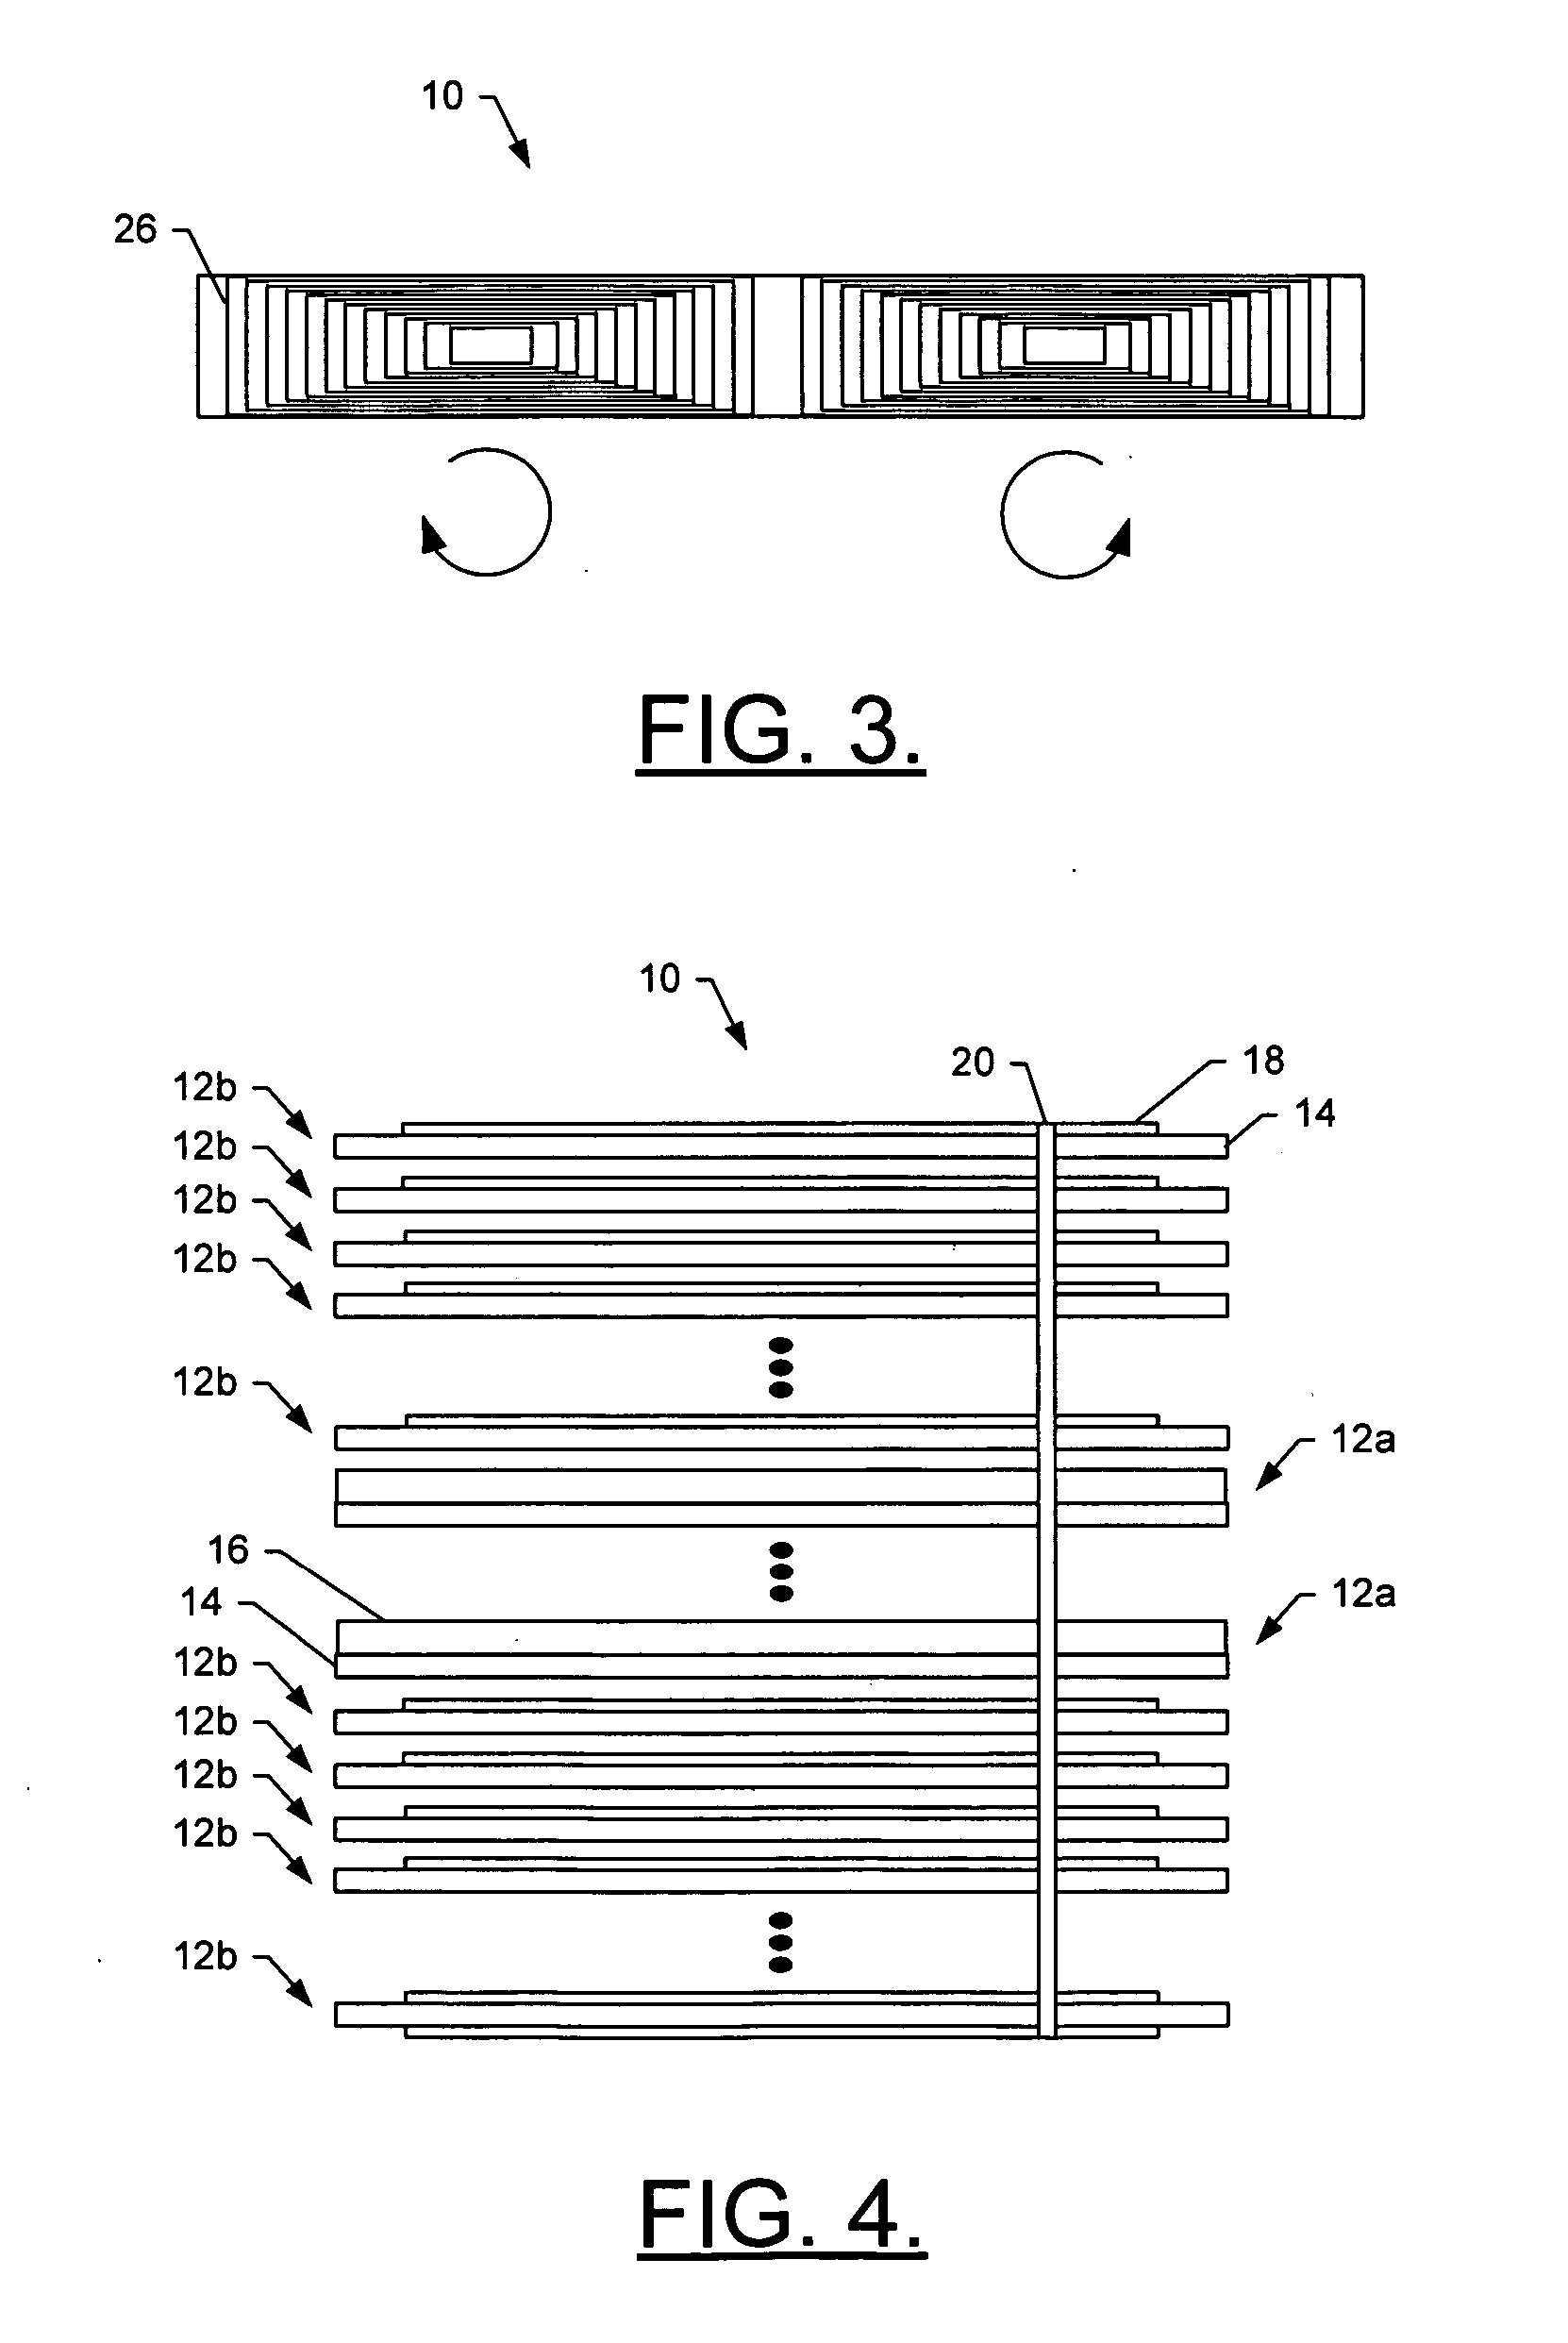 Printed circuit card-based proximity sensor and associated method of detecting a proximity of an object